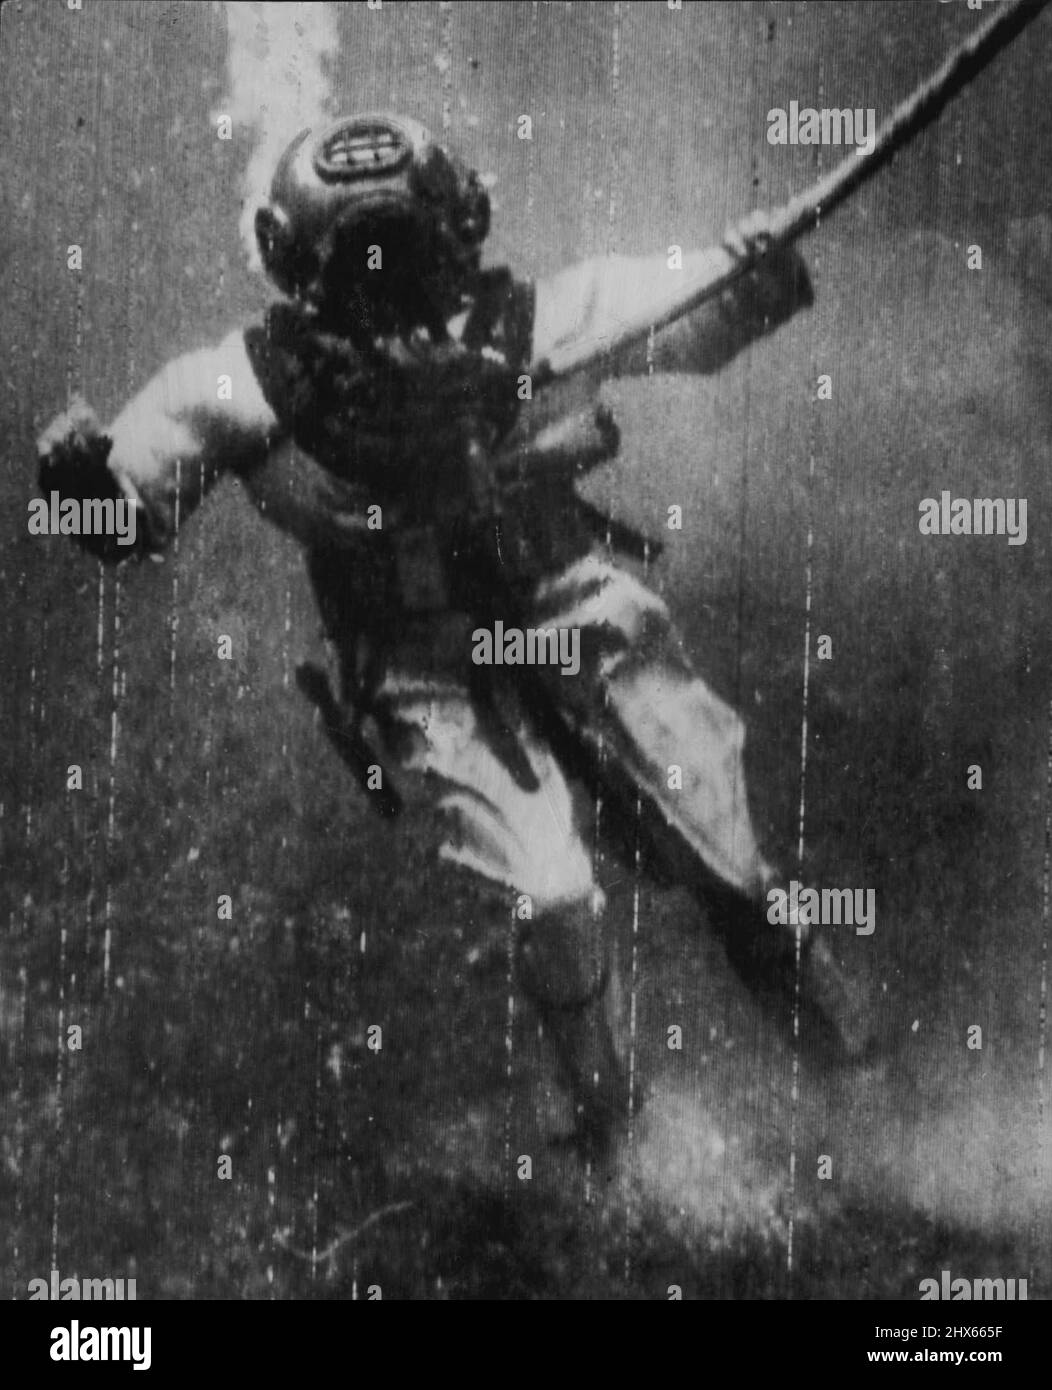 On Bottom Of Bikini Lagoon -- This Navy diver stirs up coral 'Dust' as he hits bottom at 162 feet in Bikini Lagoon while working on preparations for the forth coming Atom Bomb test scheduled for July *****. This joint Army Navy task force 1 photo was radioed by the Navy From the U.S.S. Mount McKinley at Bikini to San Francisco today. On the floor of Bikini lagoon, this US Navy diver stirs up coral 'dust' 162 feet below the surface while working on preparations for recent Atom-Bomb test. June 3 Stock Photo